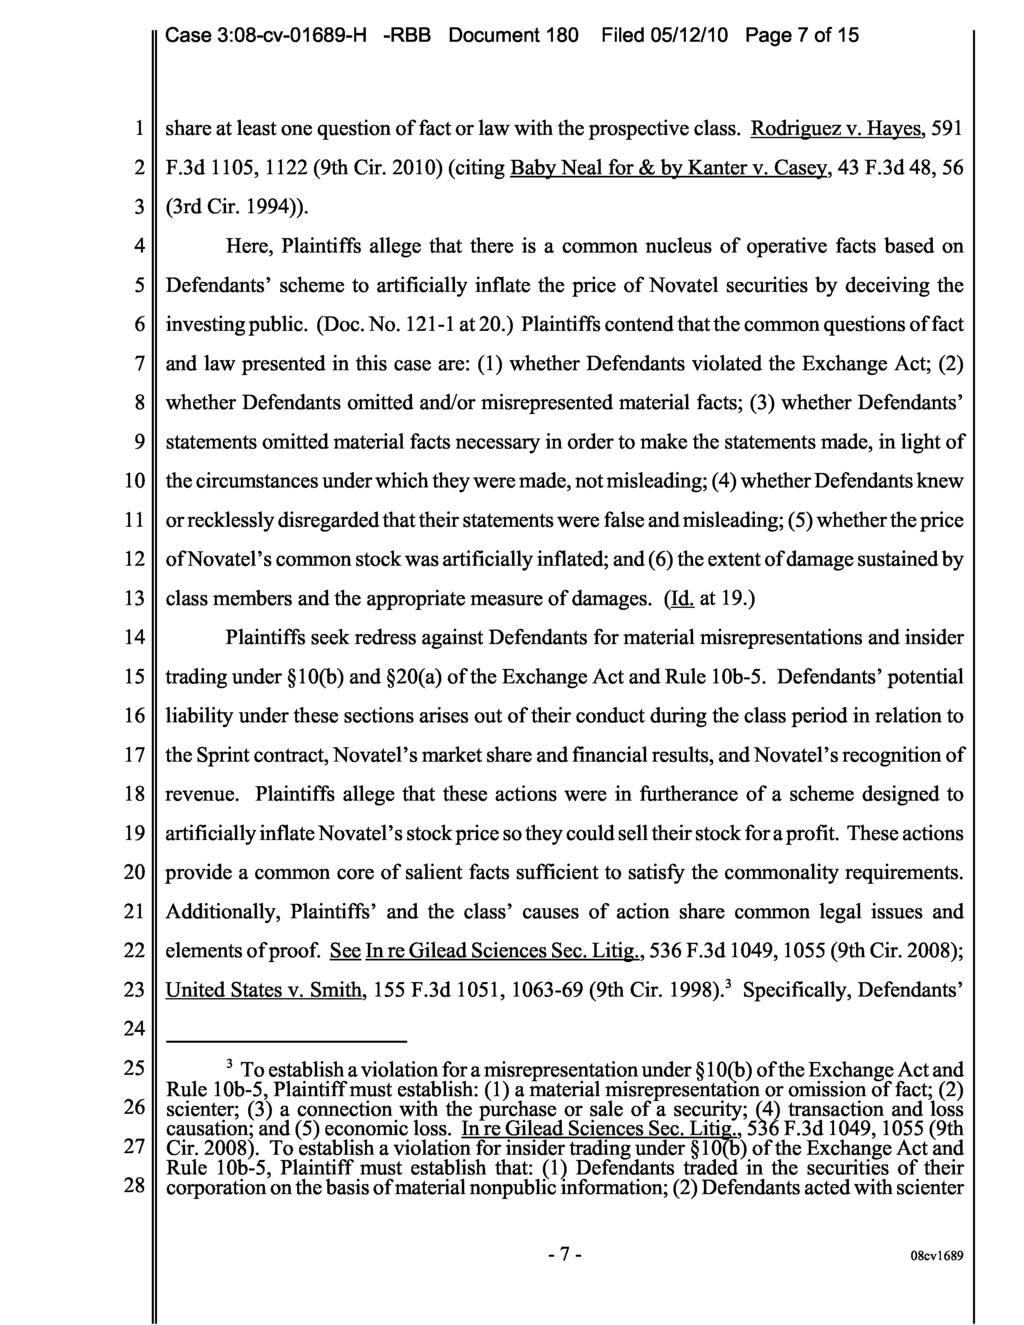 Case 3:08-cv-01689-H -RBB Document 180 Filed 05/12/10 Page 7 of 15 1 share at least one question of fact or law with the prospective class. Rodriguez v. Hayes, 591 2 F.3d 1105, 1122 (9th Cir.